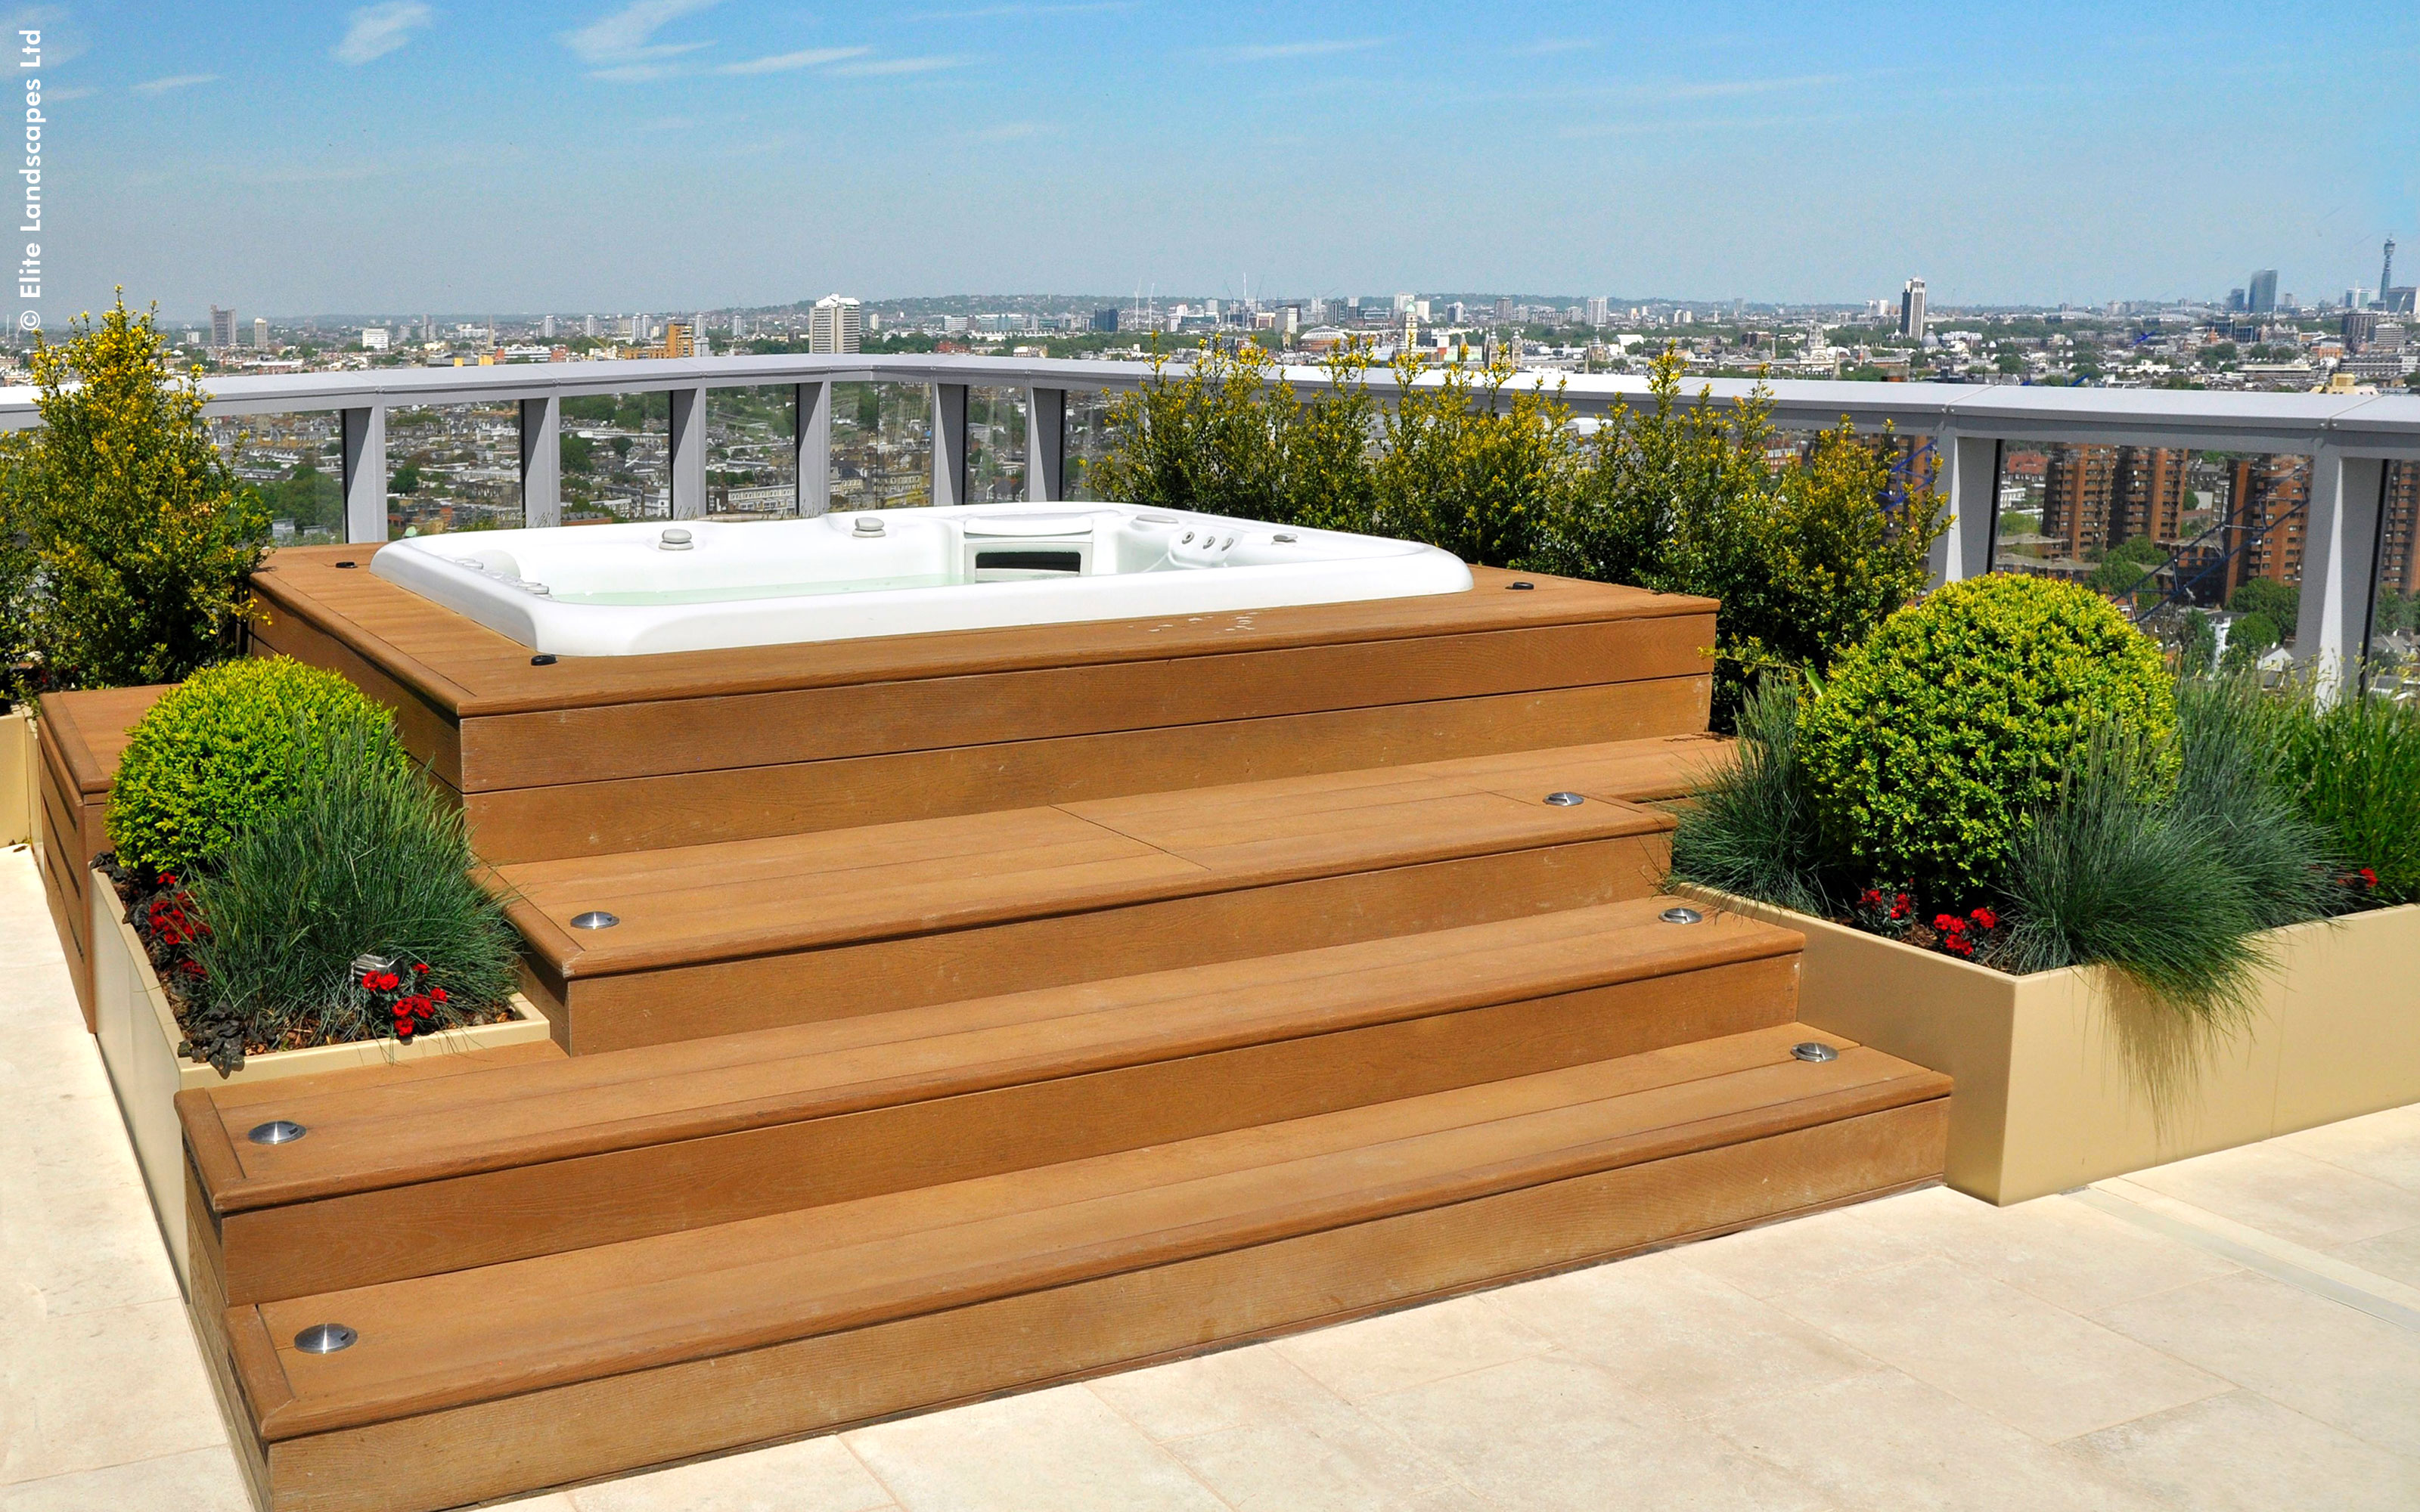 Roof terrace with wooden decking and a hot tub